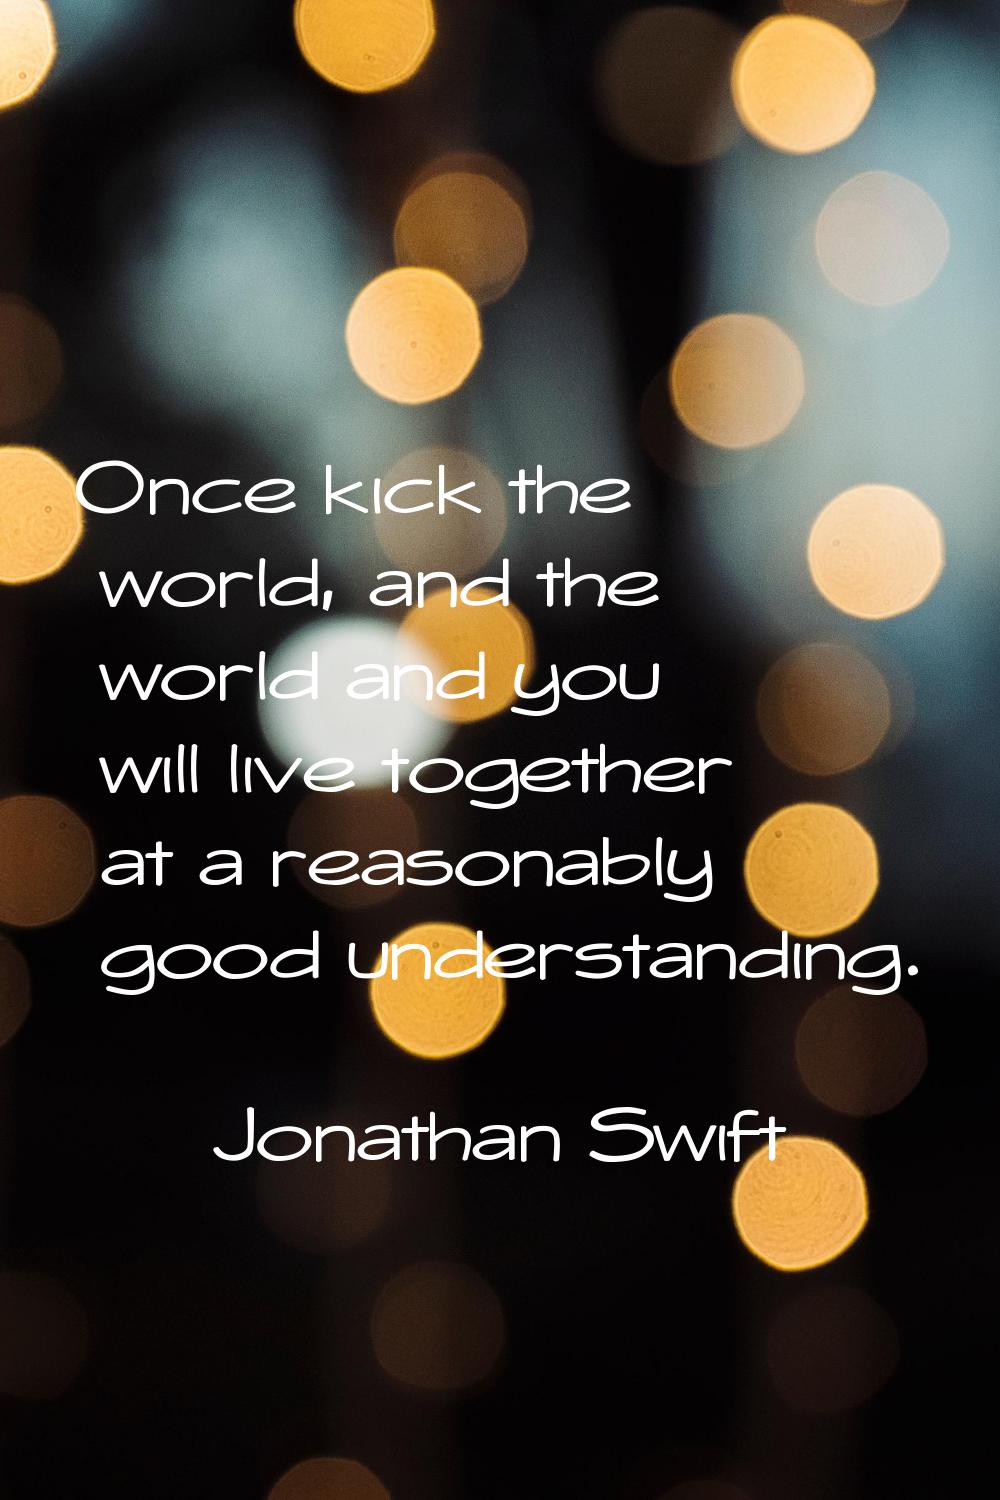 Once kick the world, and the world and you will live together at a reasonably good understanding.